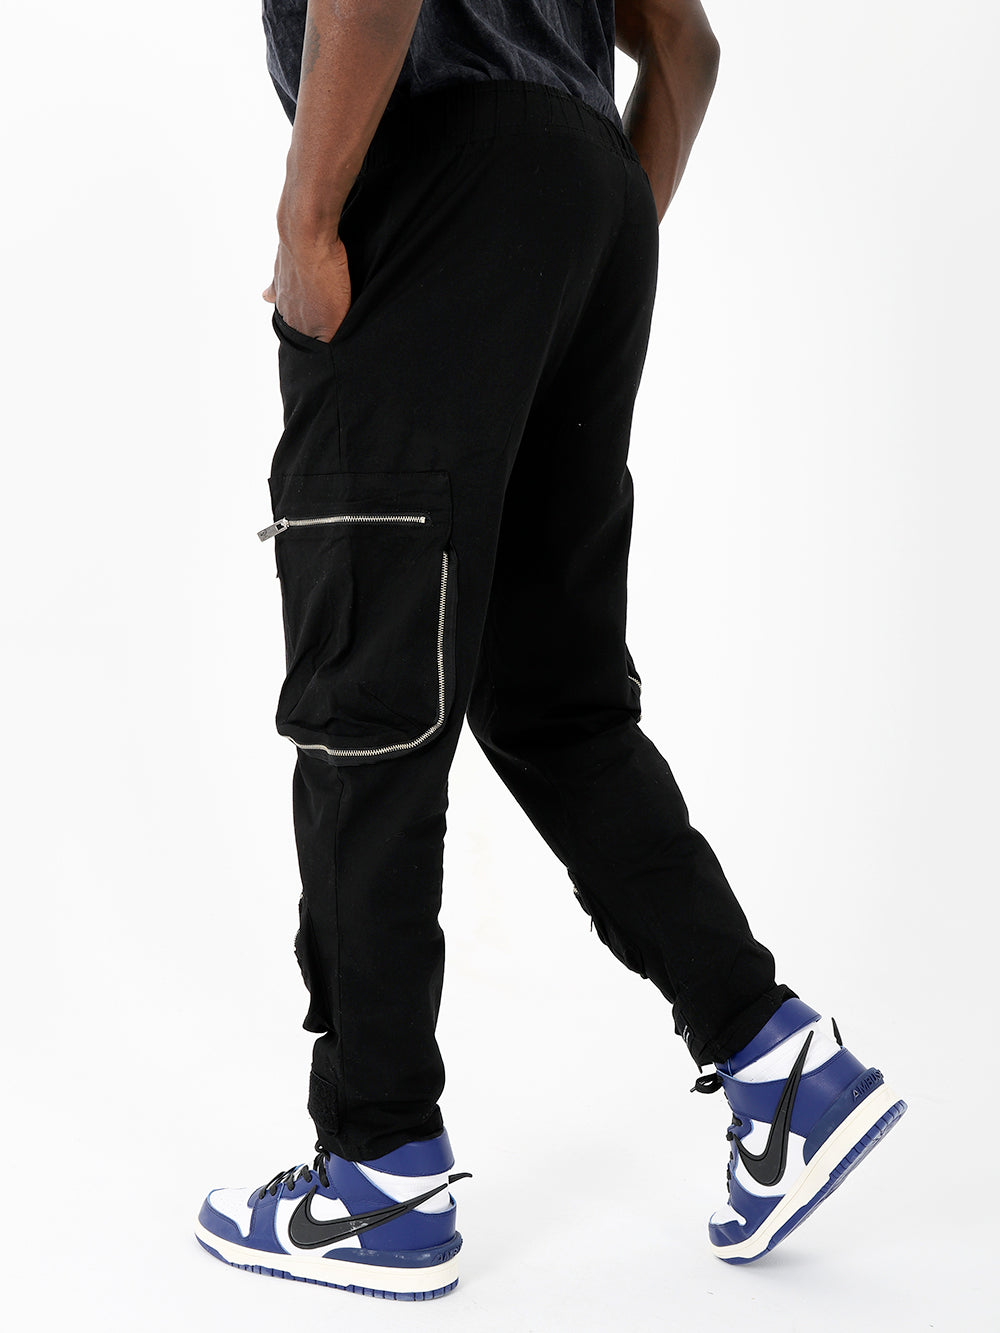 A man wearing black raider joggers and sneakers.